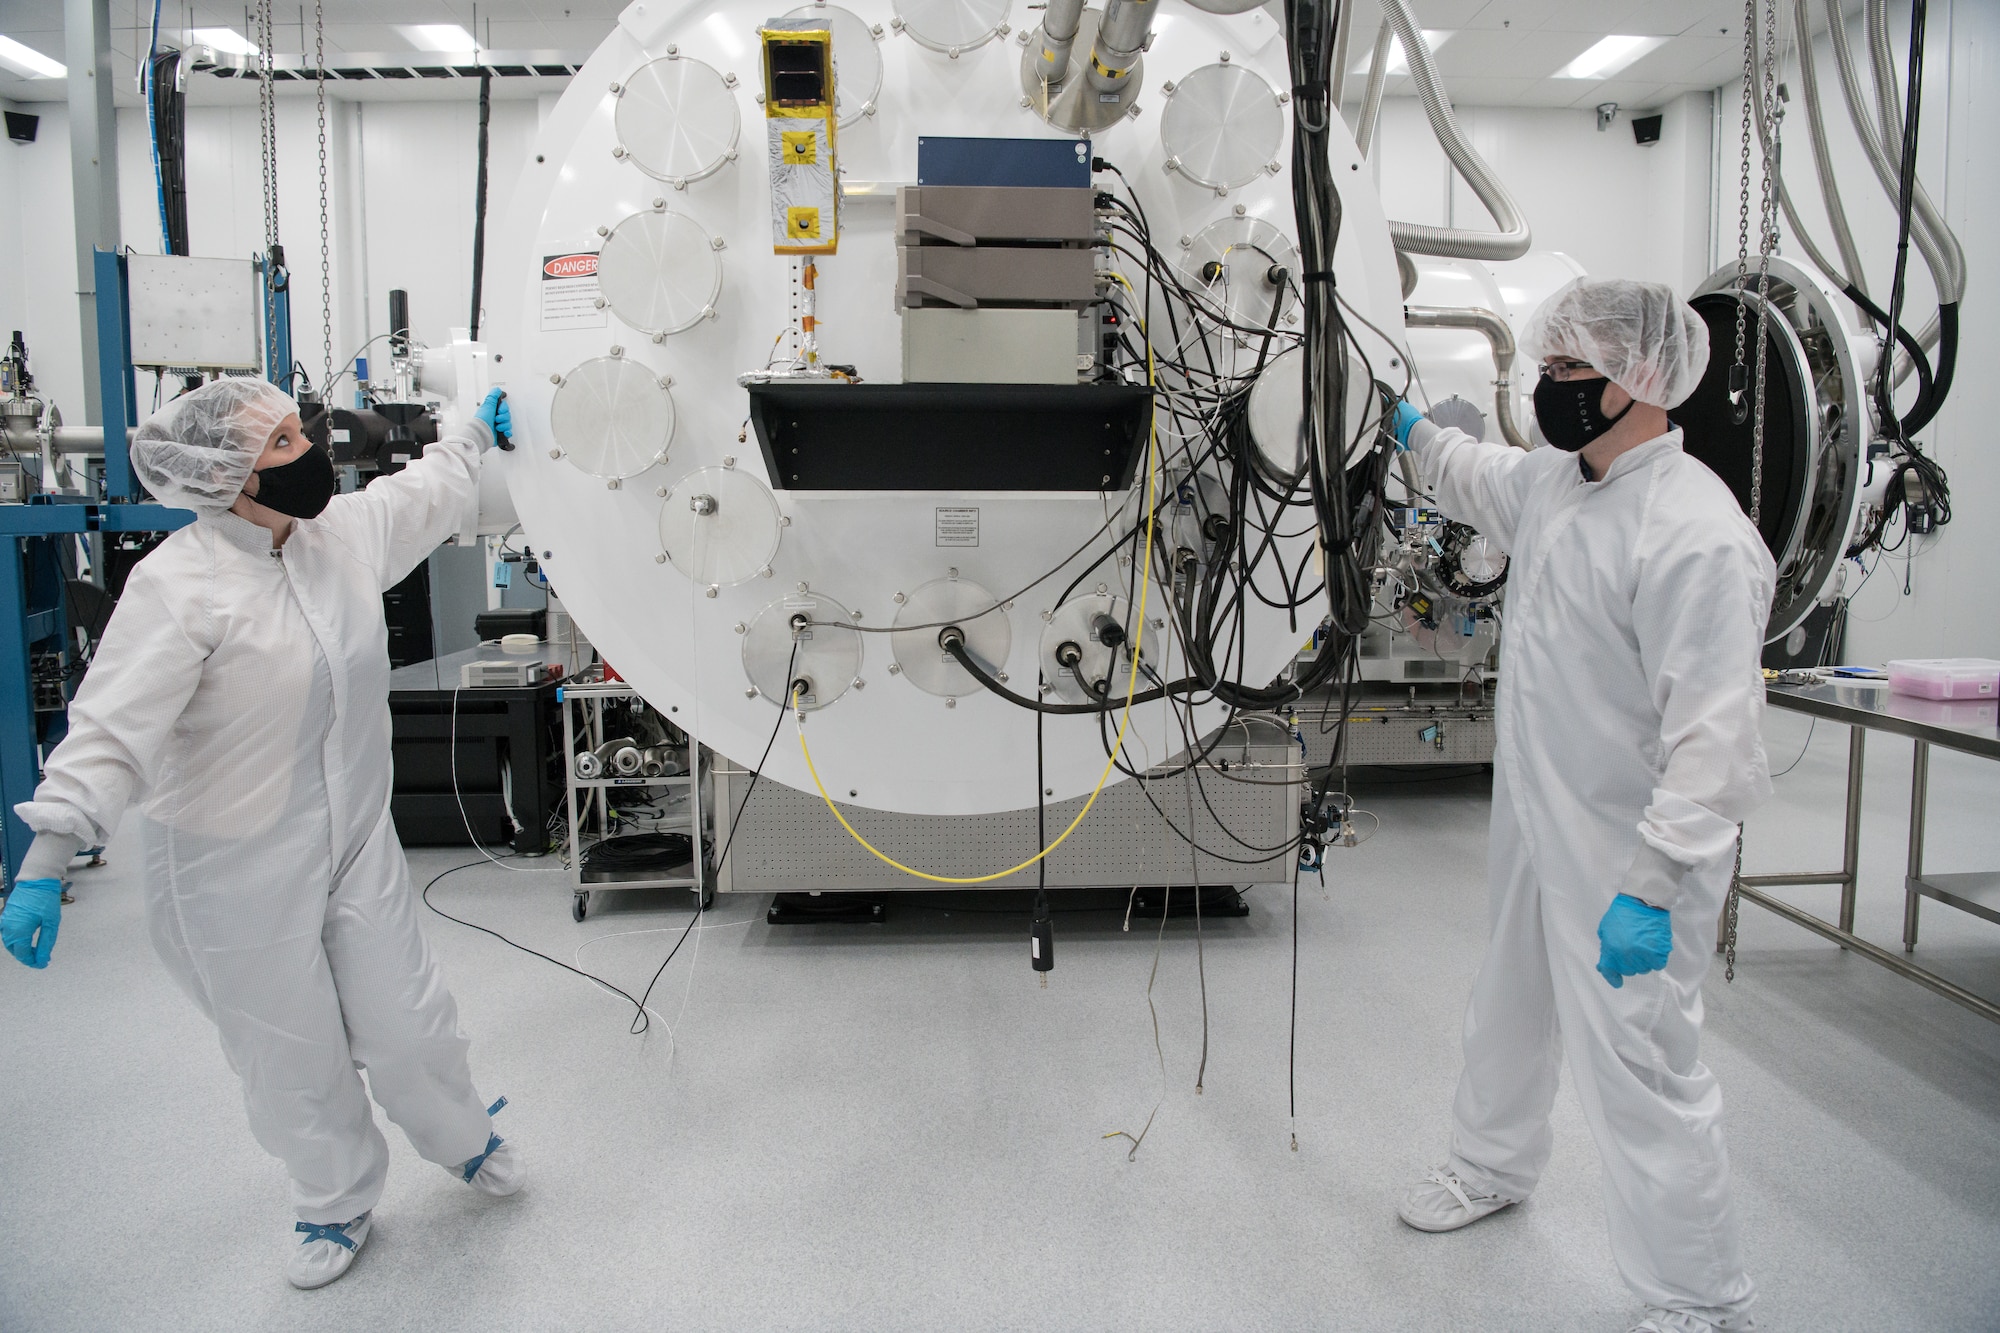 Kellye Burns, left, a space test engineer, and Eric D'Ambro, a test operations engineer, open the door of a Space Asset Resilience thermal vacuum chamber, Aug. 3, 2020, at Arnold Air Force Base, Tenn. The chamber is contained in a class 10,000 clean room. (U.S. Air Force photo by Jill Pickett)